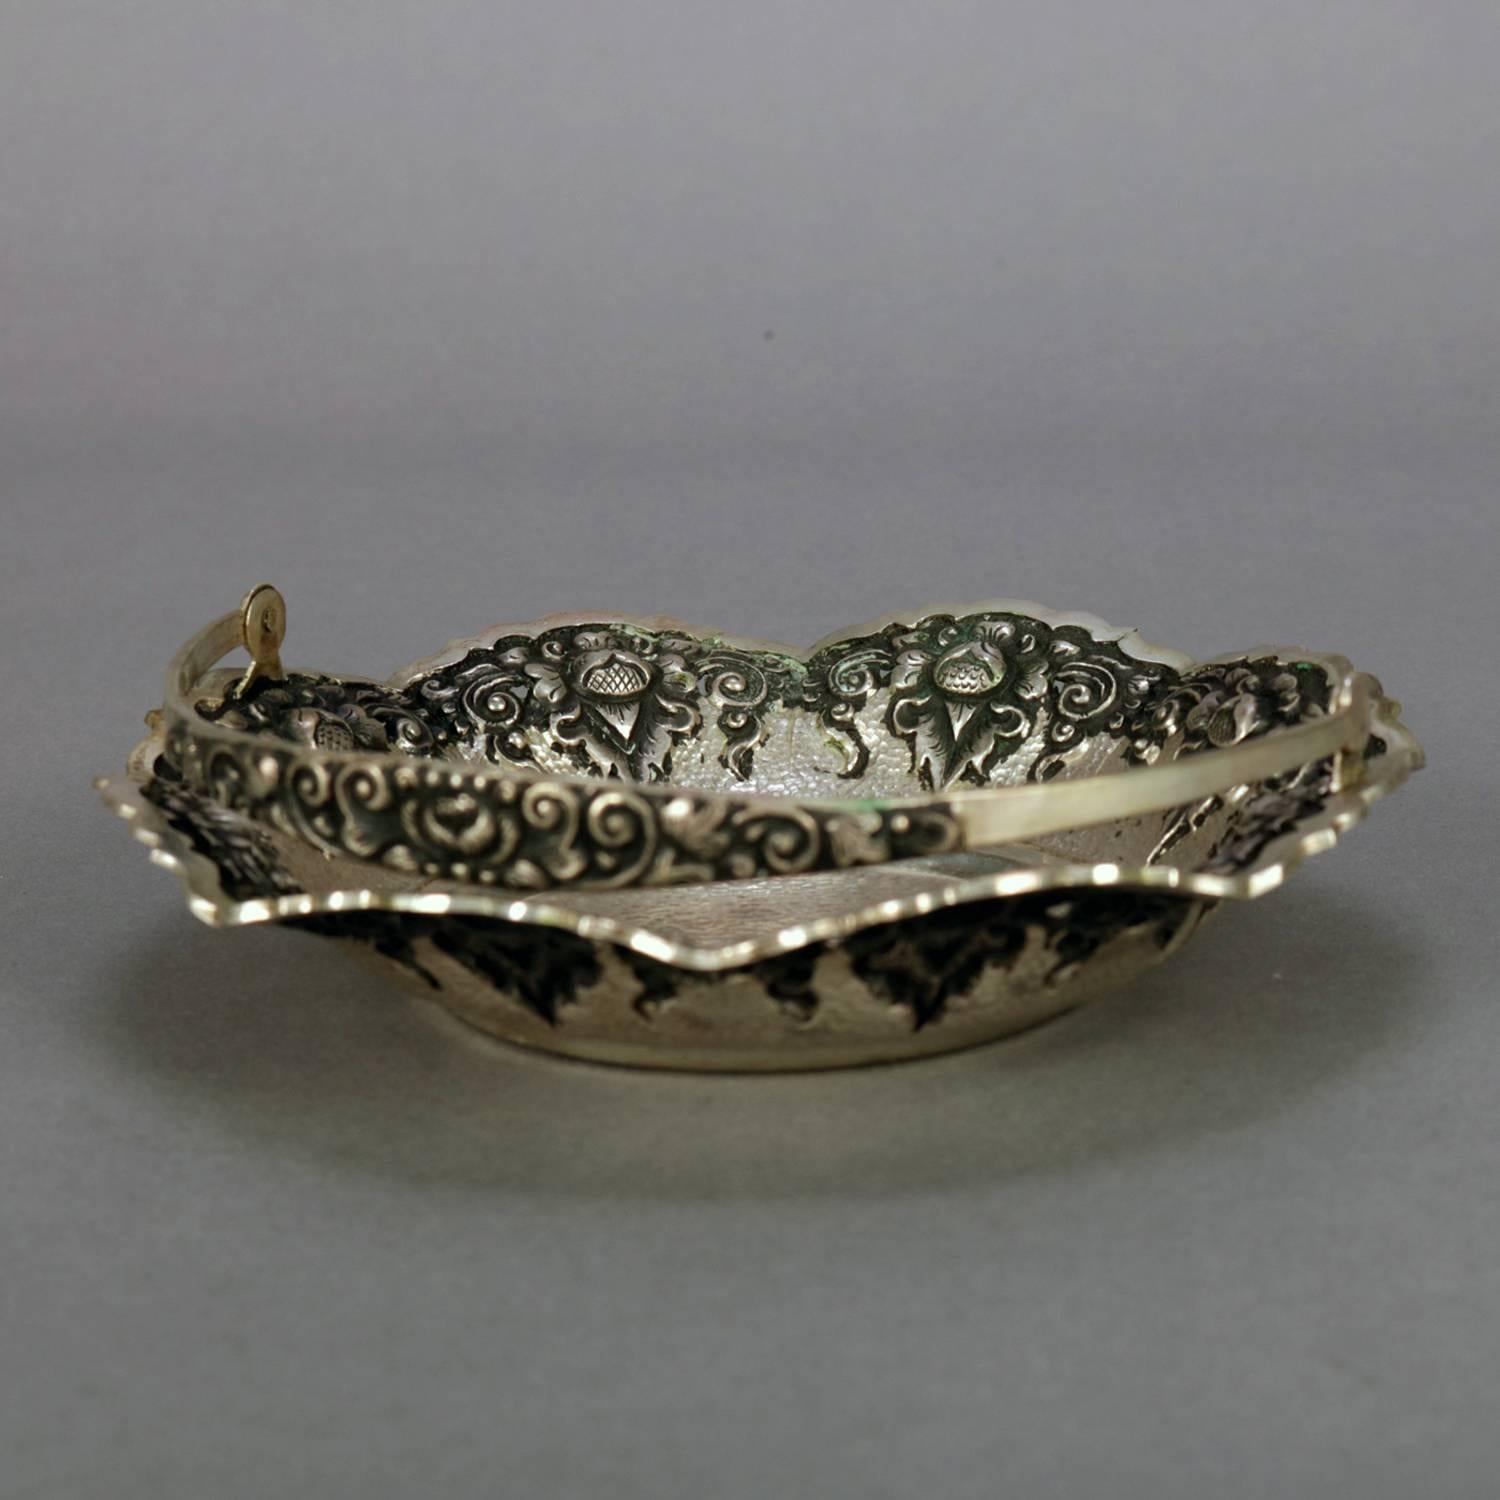 European Antique Continental .800 Silver Reticulated Floral Repousse Bridal Basket 4.9toz For Sale